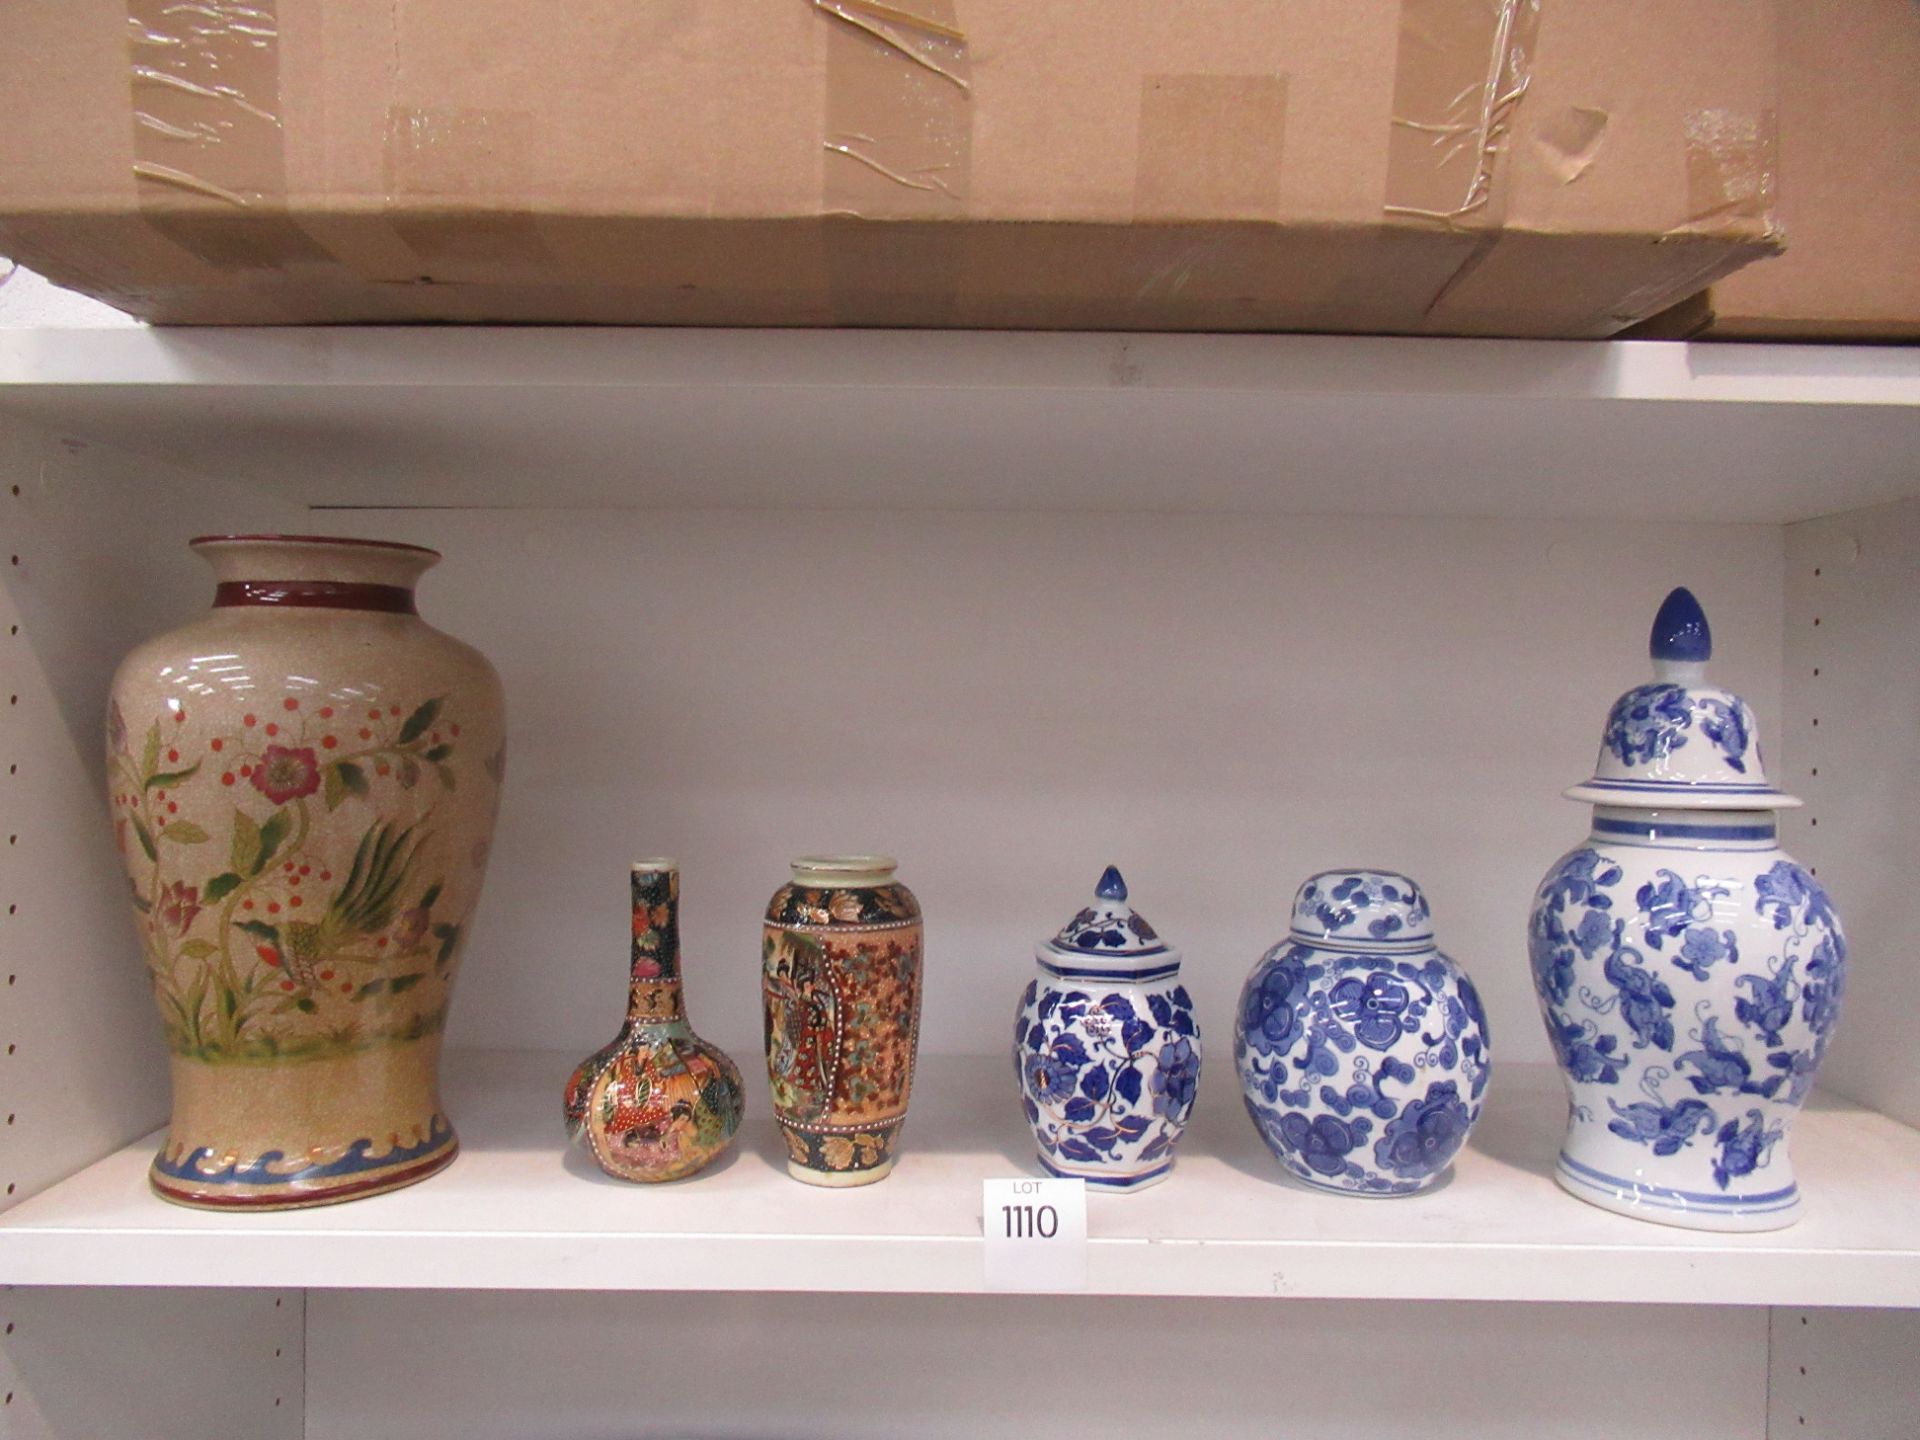 Shelf of Various Porcelain Items including a Vase with painted birds.